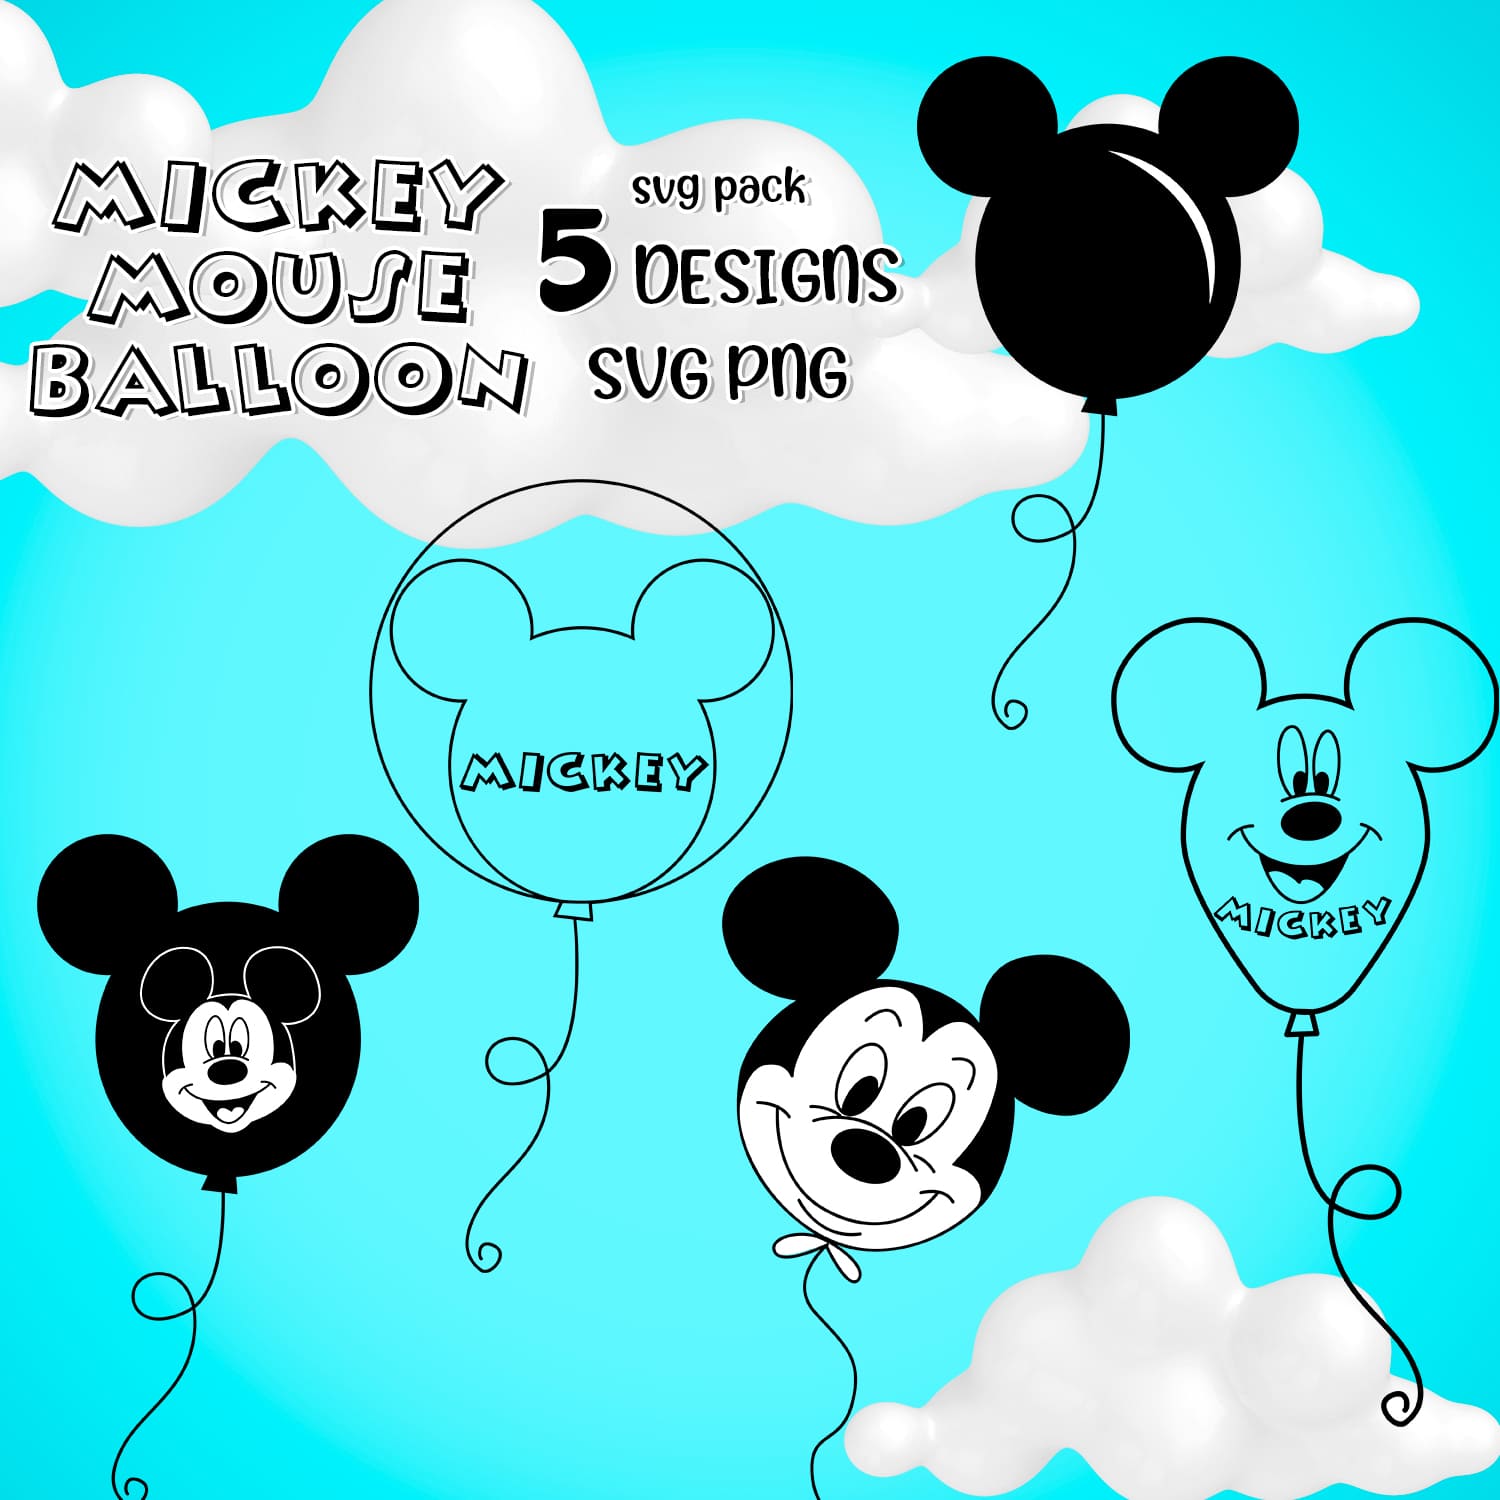 Mickey Mouse Balloon SVG - main image preview.